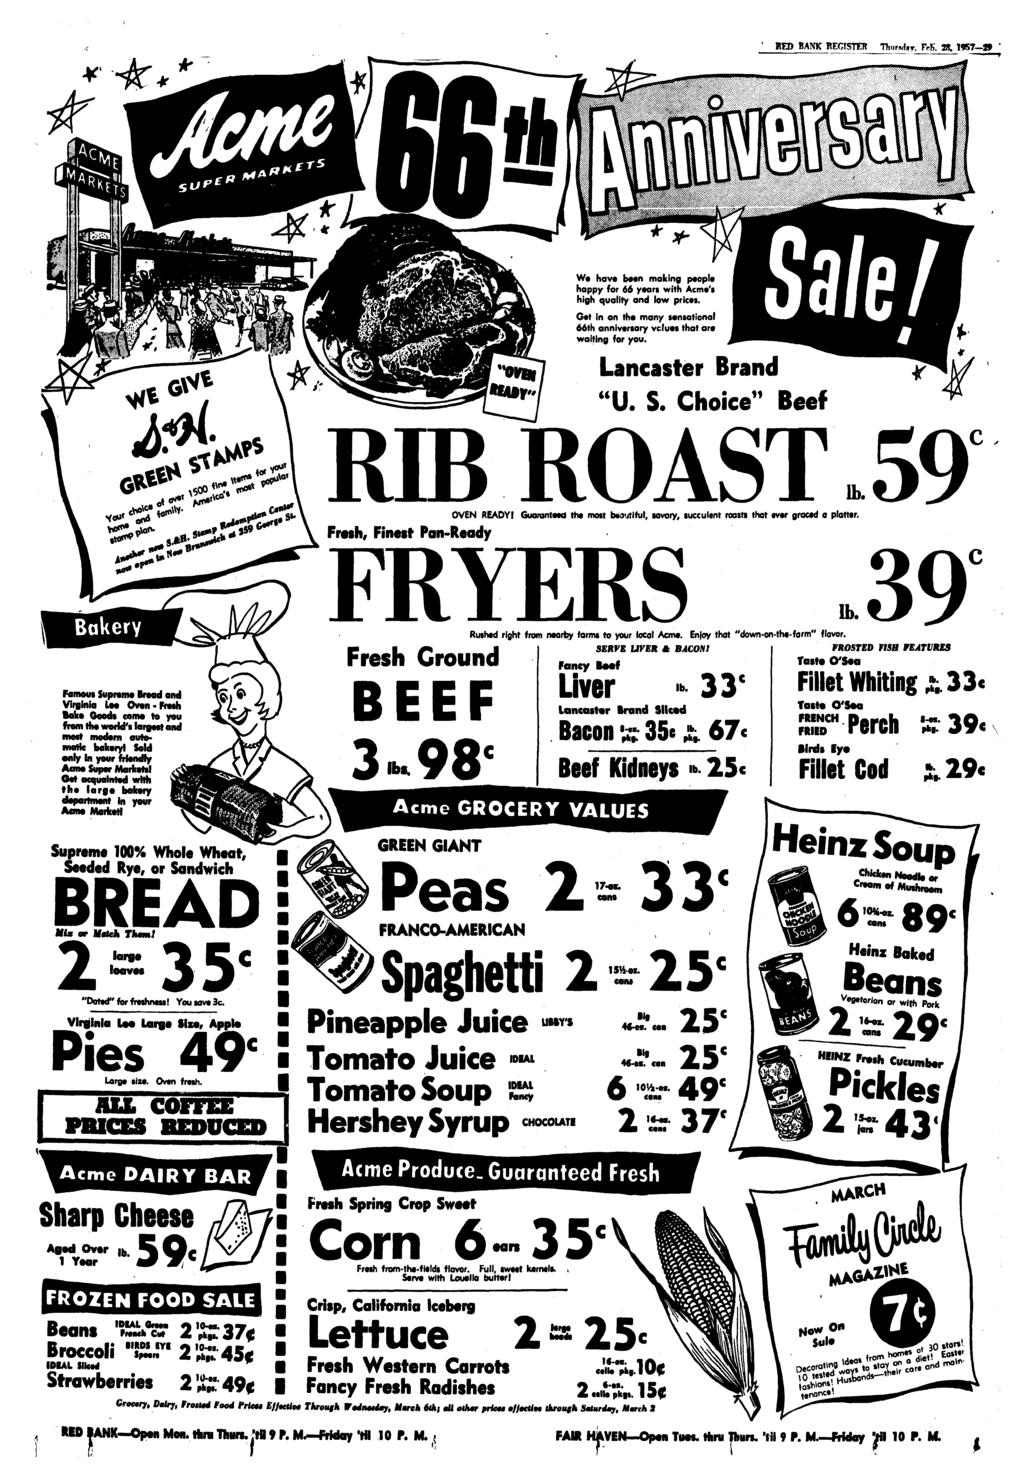 ' RED BANK REGISTER Thursdsr. FeB. 28, 1957 9 We have been making people happy for 66 yean with Acme's high quality and low prices.